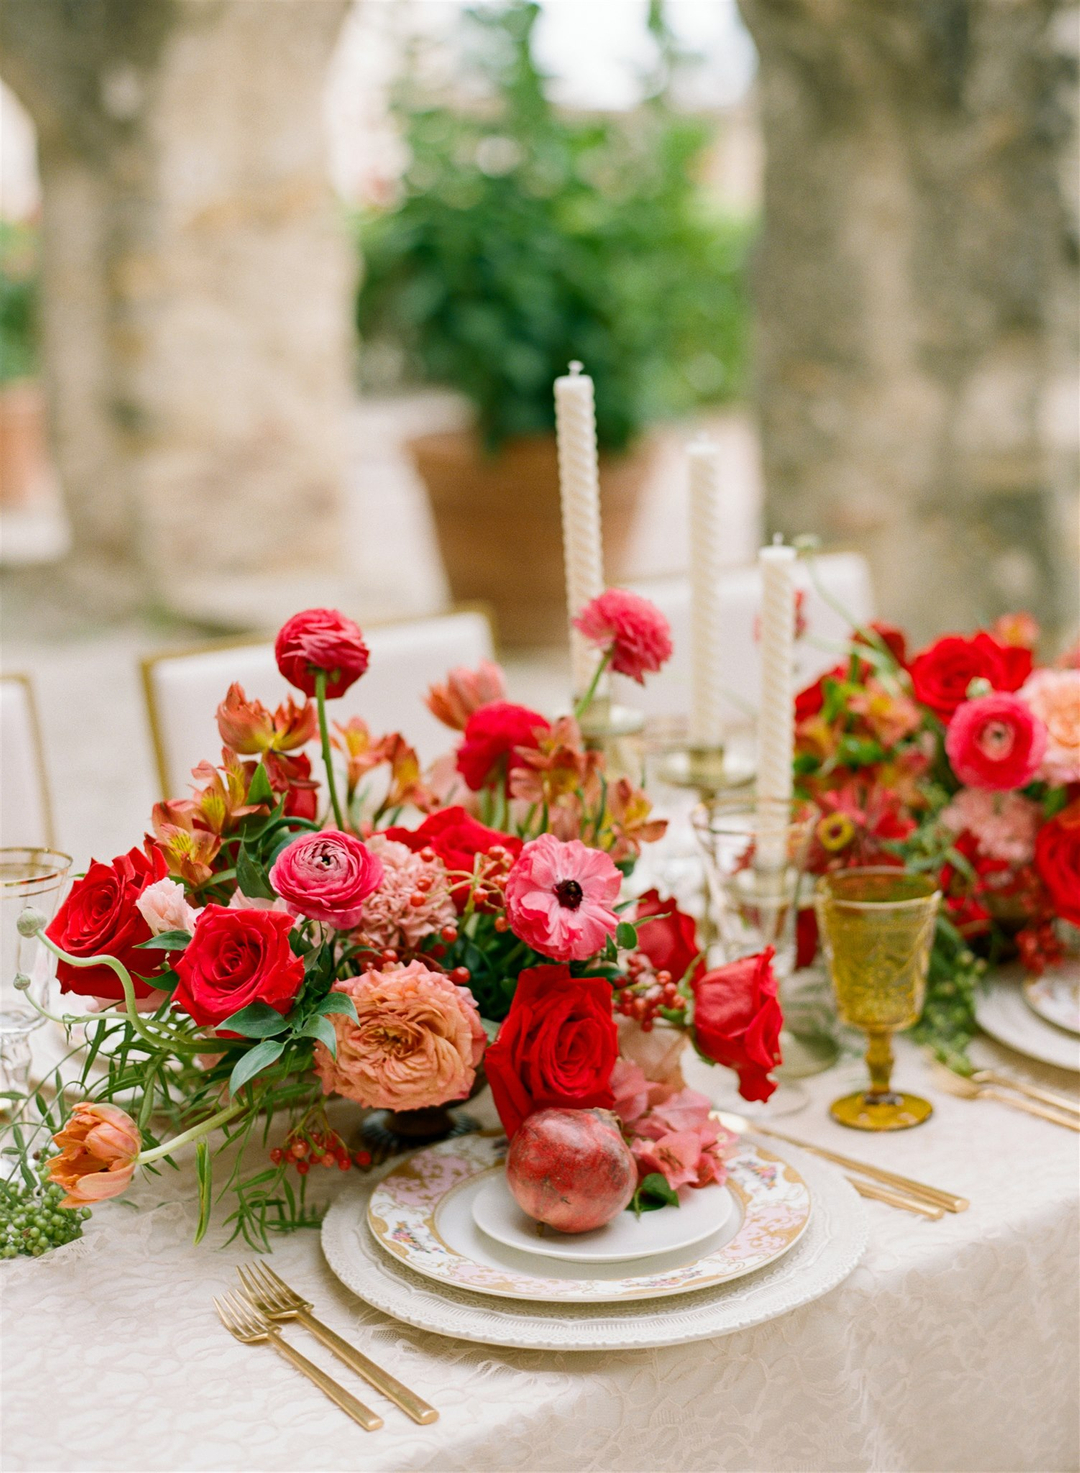 wedding reception table with red floral centerpiece and gold and white place settings